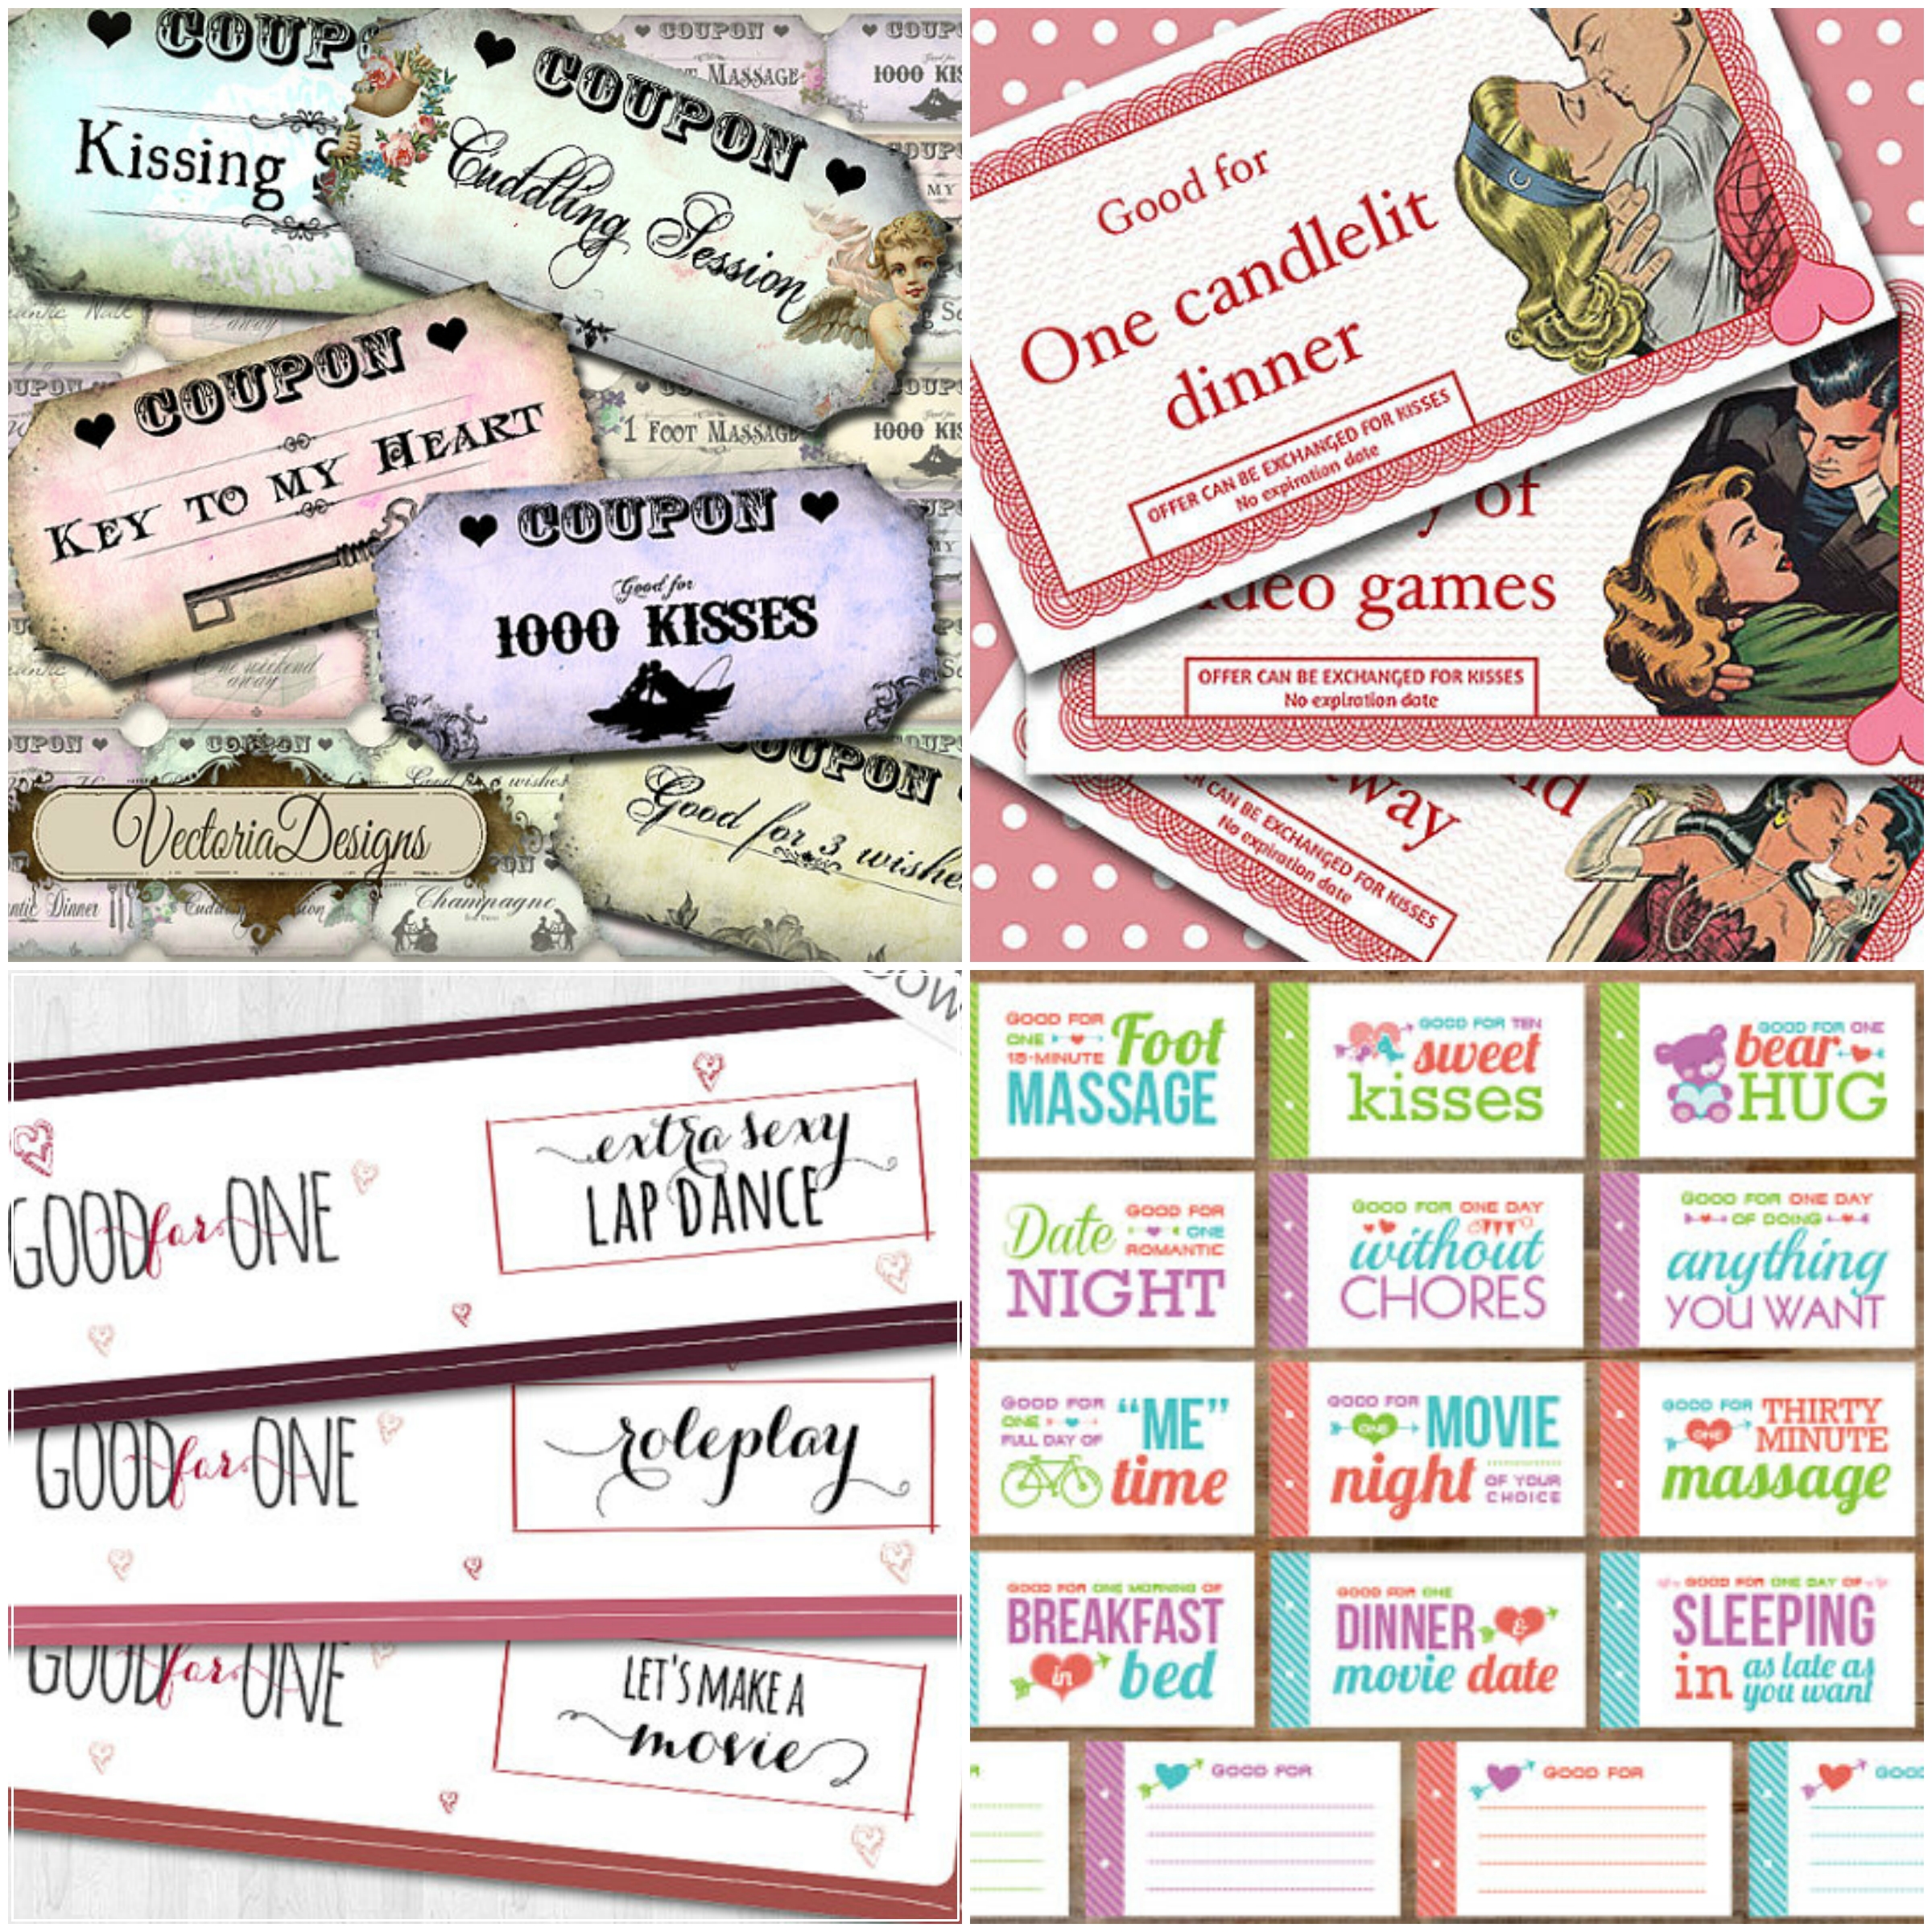 creative-homemade-birthday-gifts-for-girlfriend-love-coupon-ideas-love-coupons-homemade